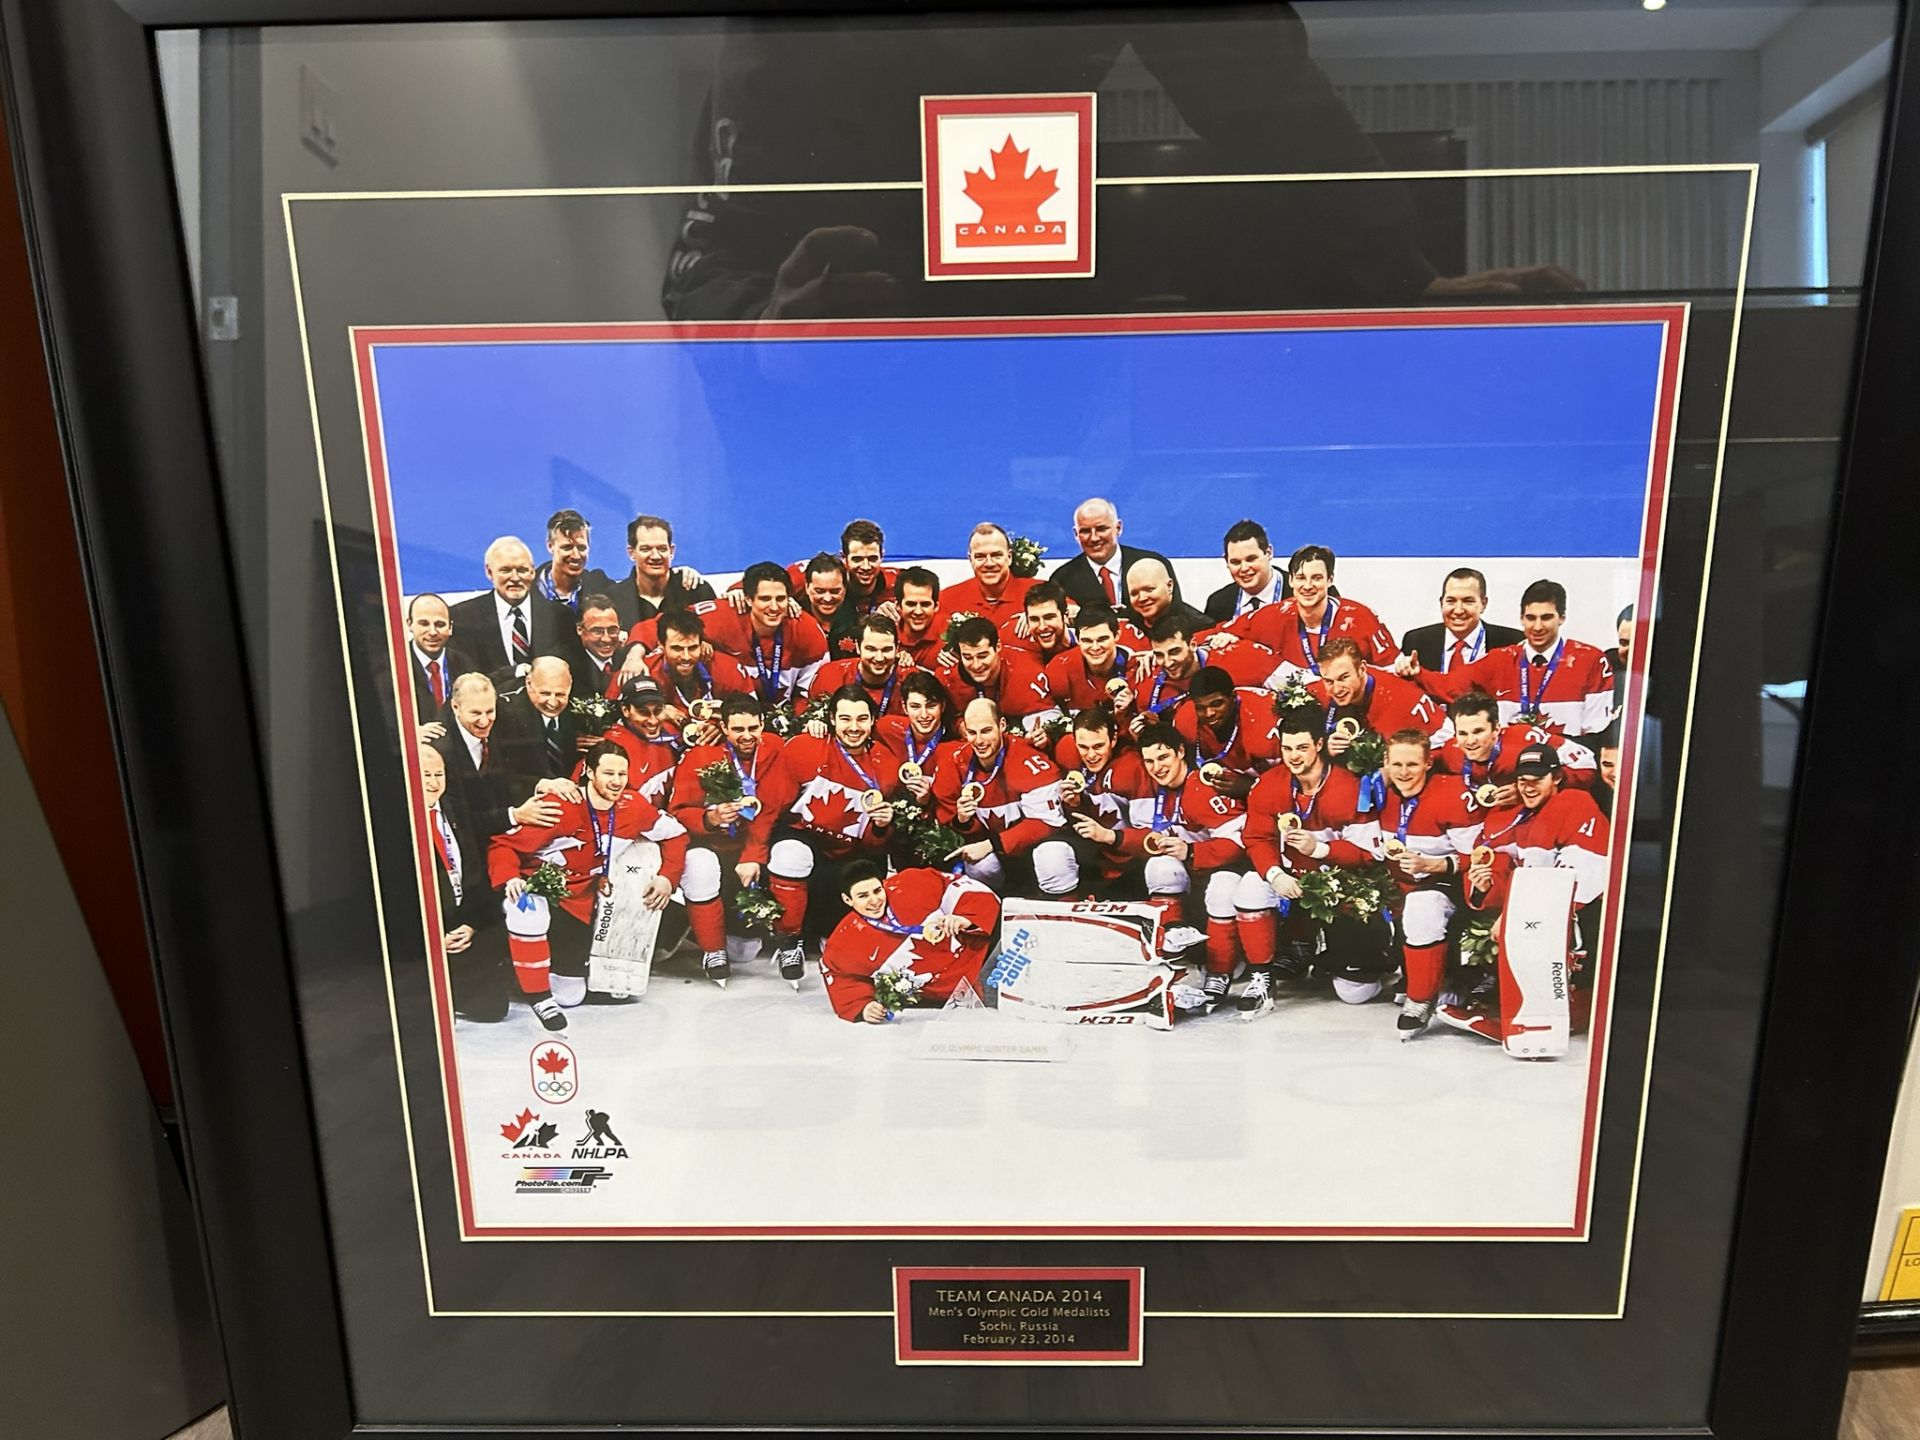 TEAM CANADA 2014 MEN'S OLYMPIC GOLD MEDAL CHAMPIONSHIP PRINT 29"X28" & RON MCLEAN COLLICUT CENTRE - Image 2 of 4